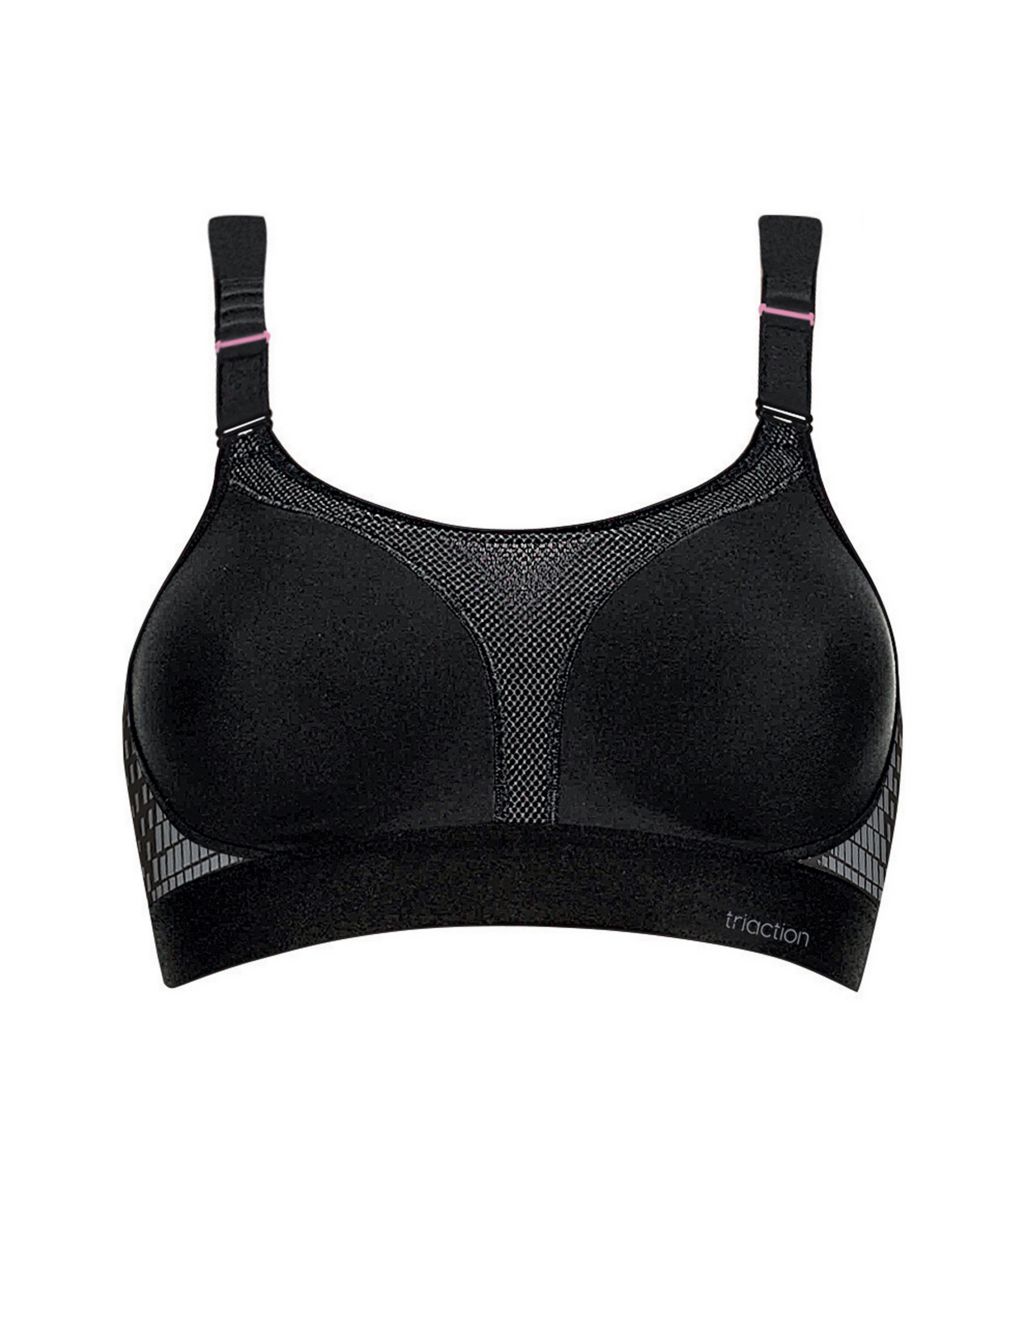 Triaction Extreme Lite Wired Sports Bra image 2